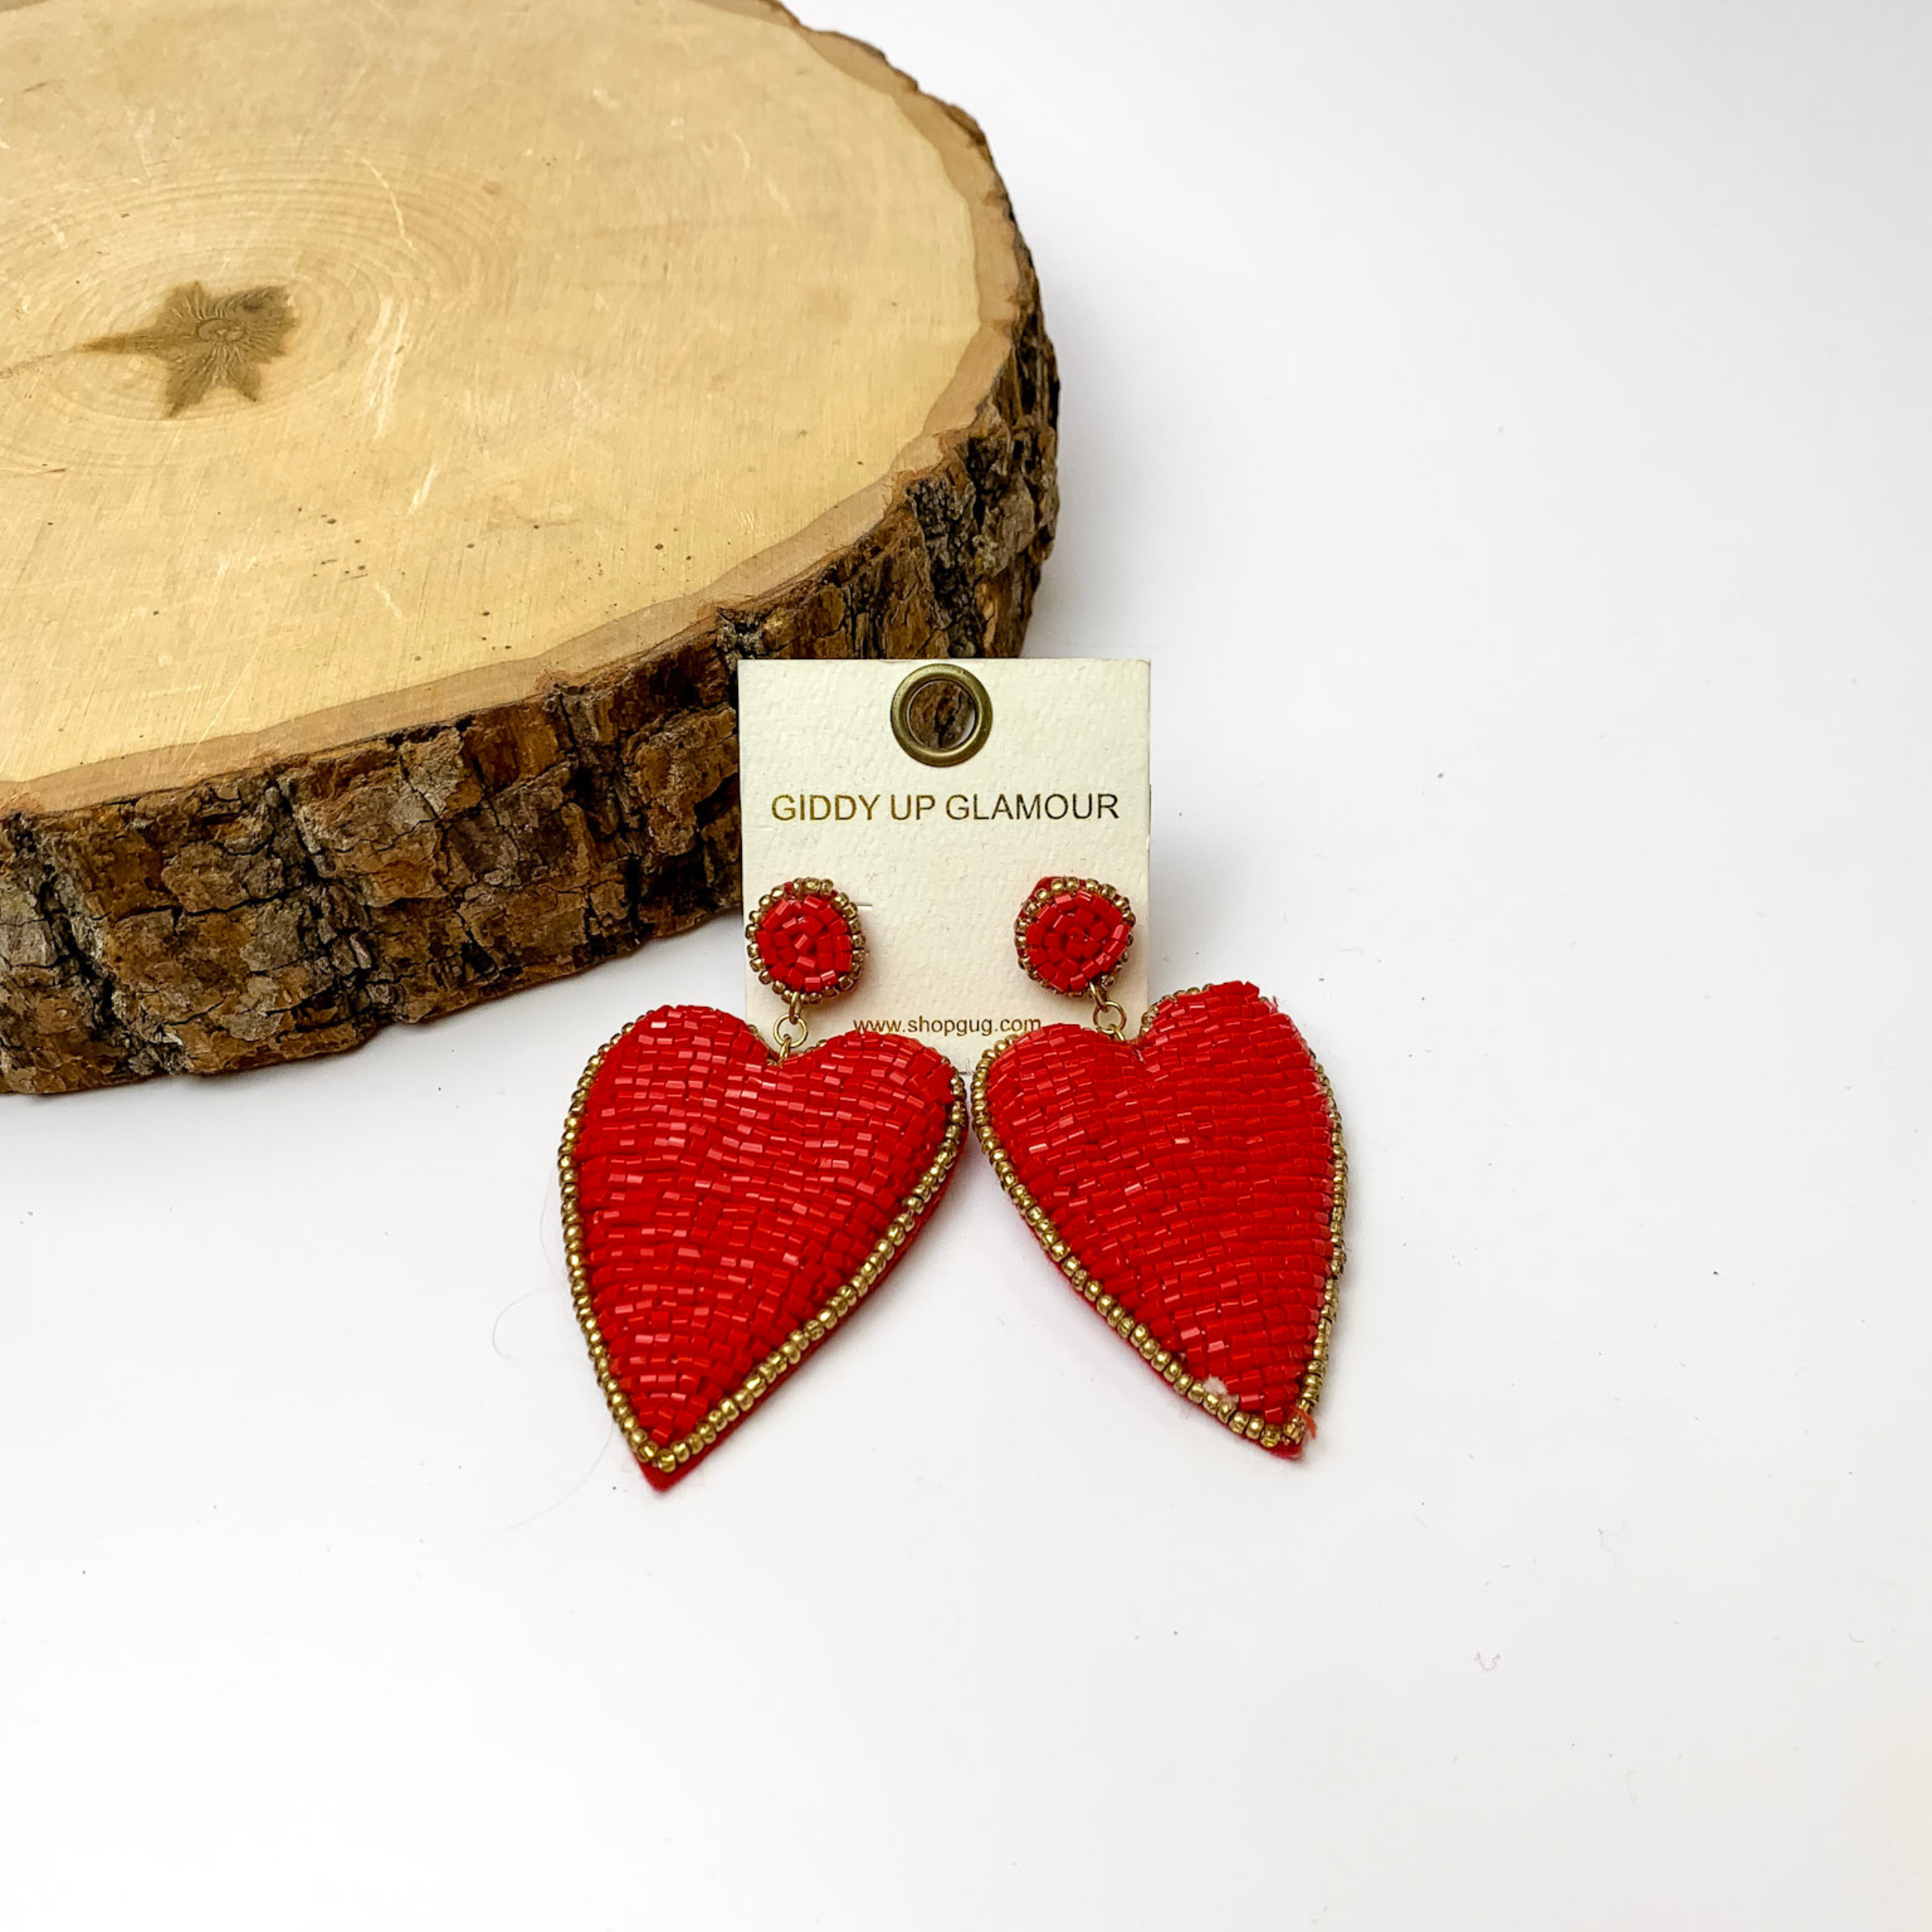 Mending Hearts Beaded Earrings in Red - Giddy Up Glamour Boutique